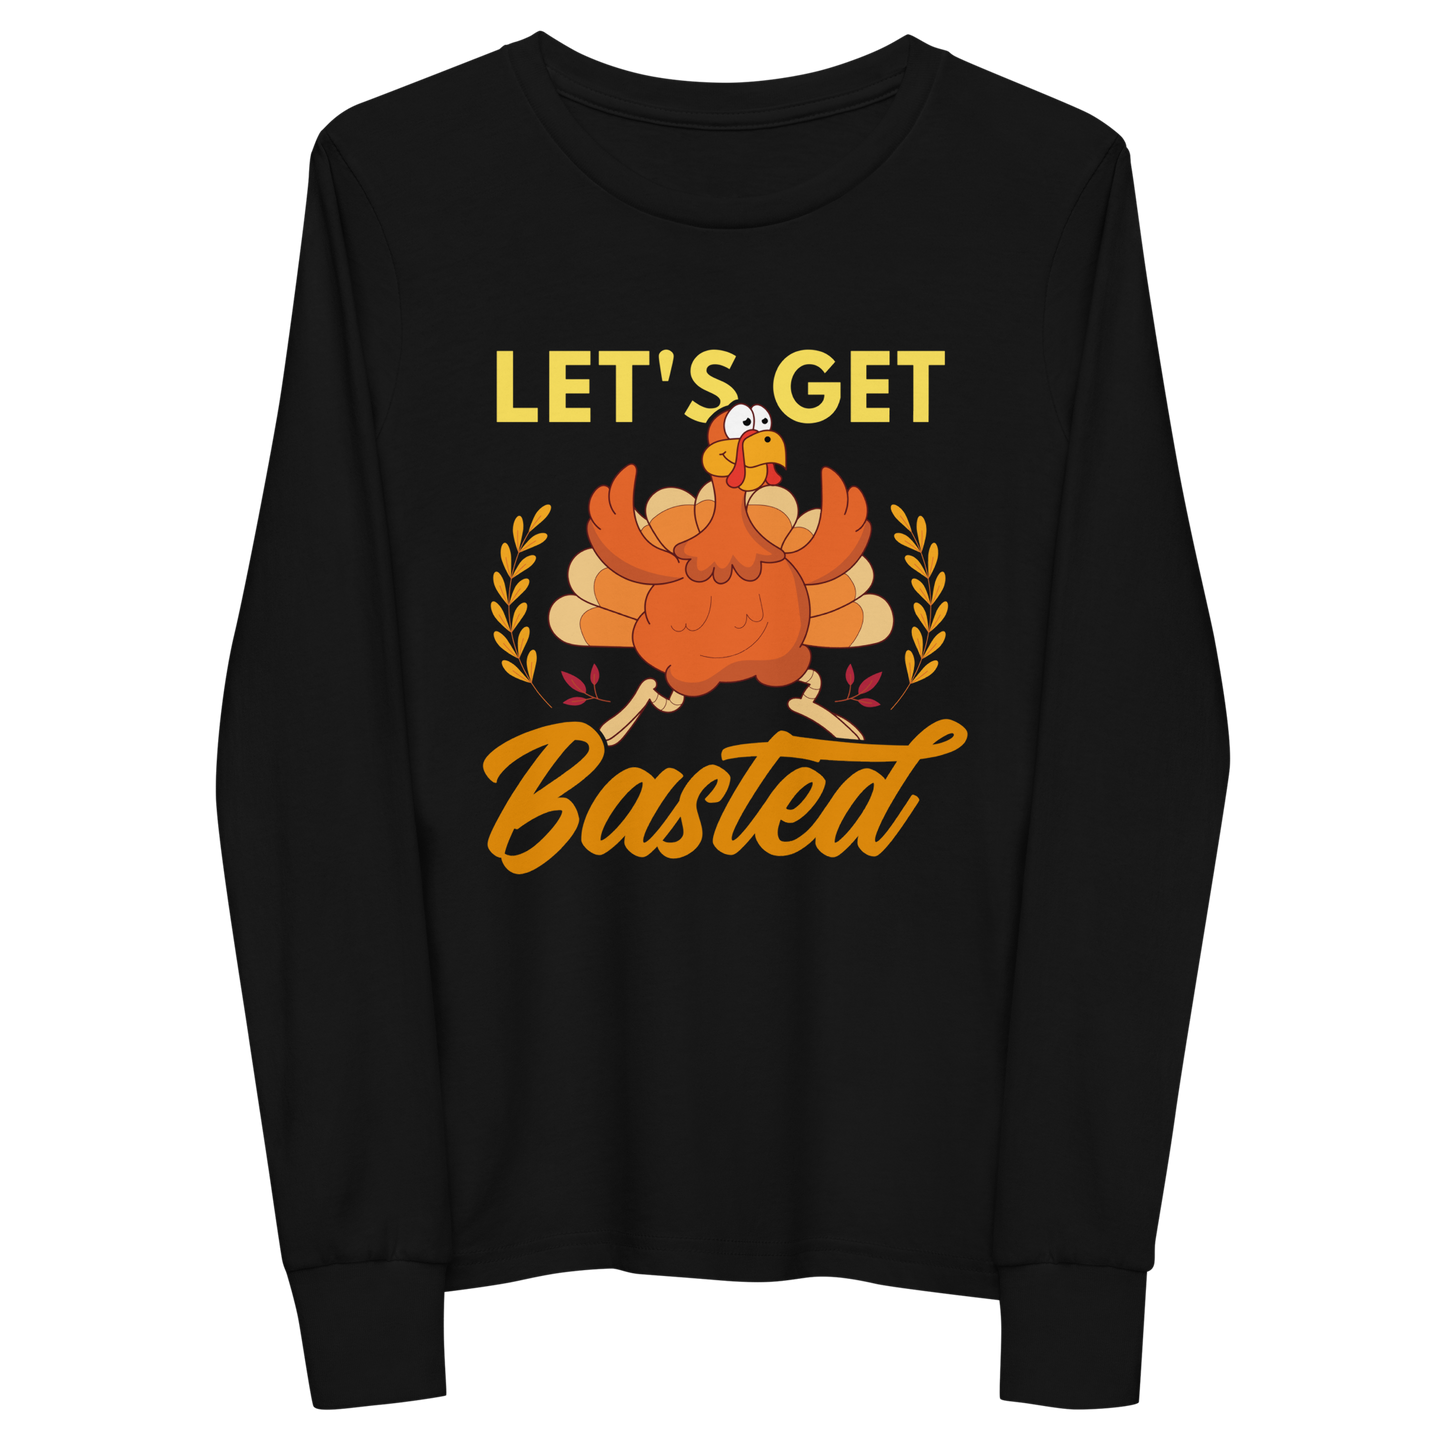 Youth GU 'Let's Get Basted' Long Sleeve T-Shirt